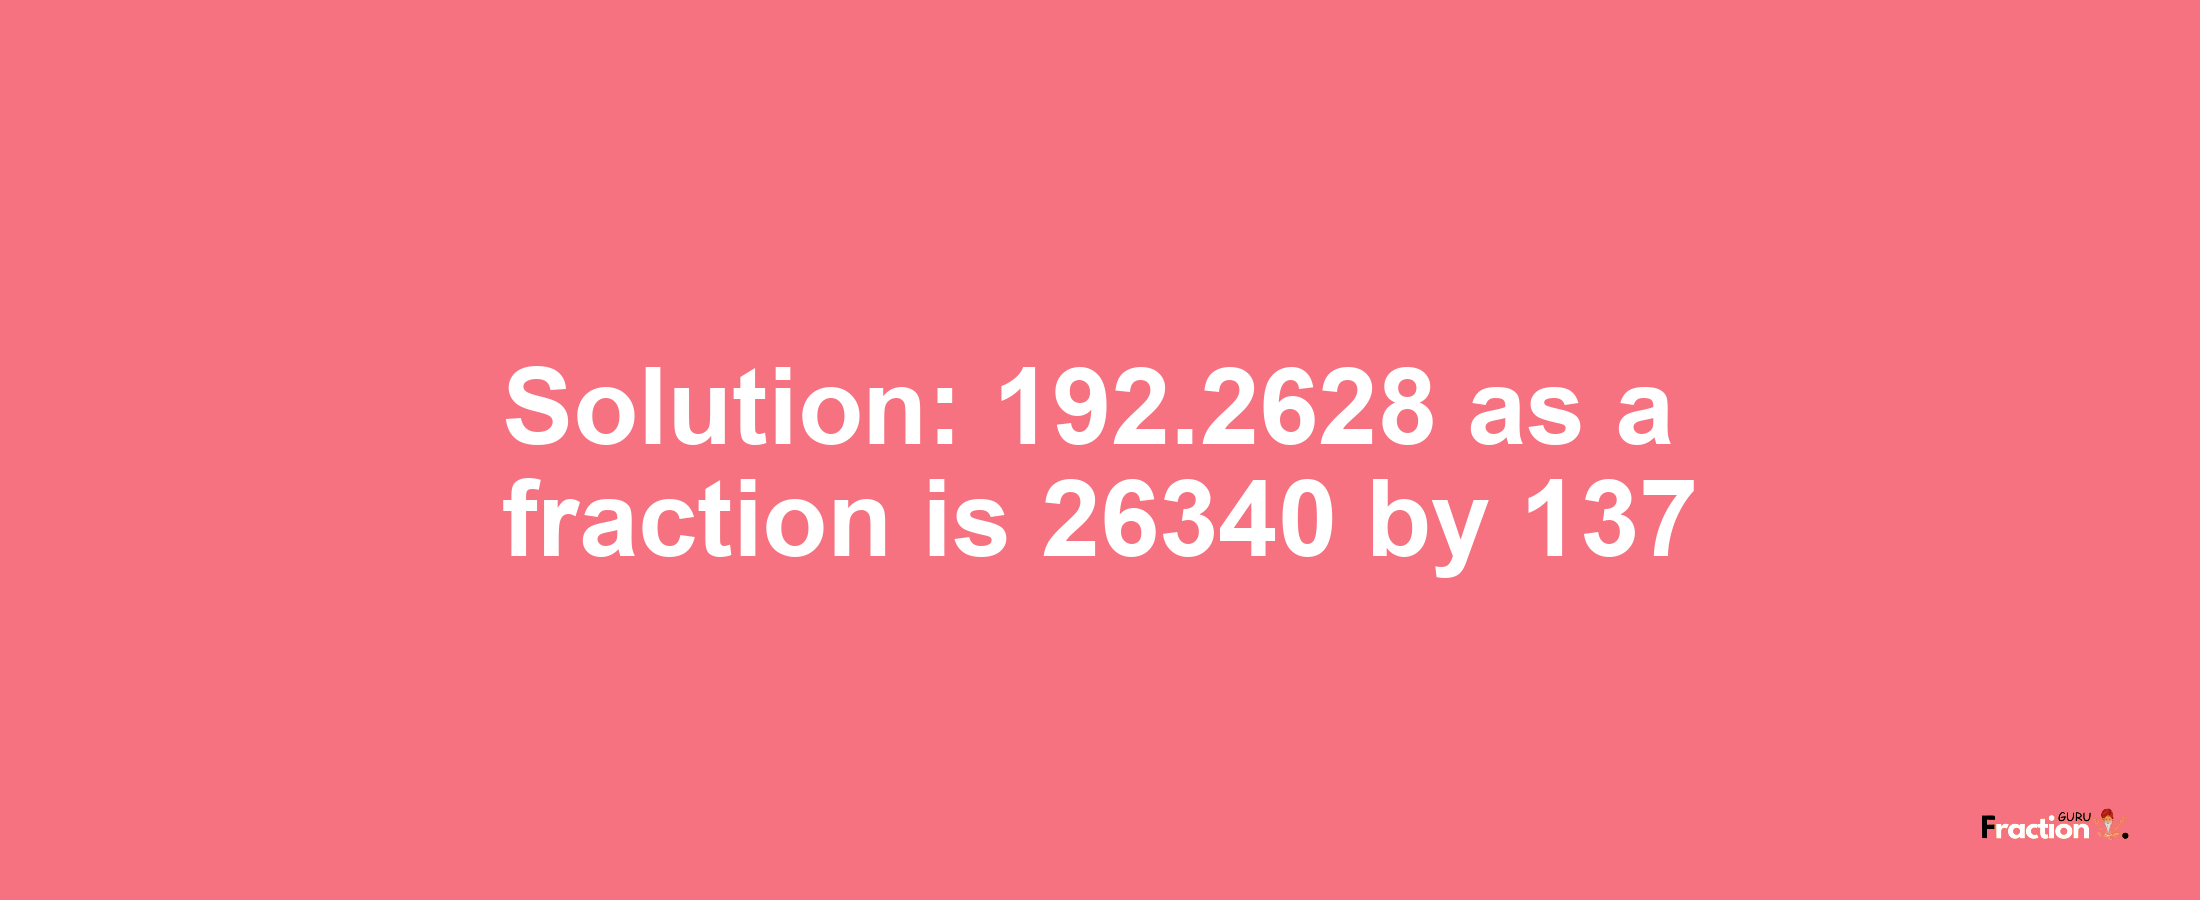 Solution:192.2628 as a fraction is 26340/137